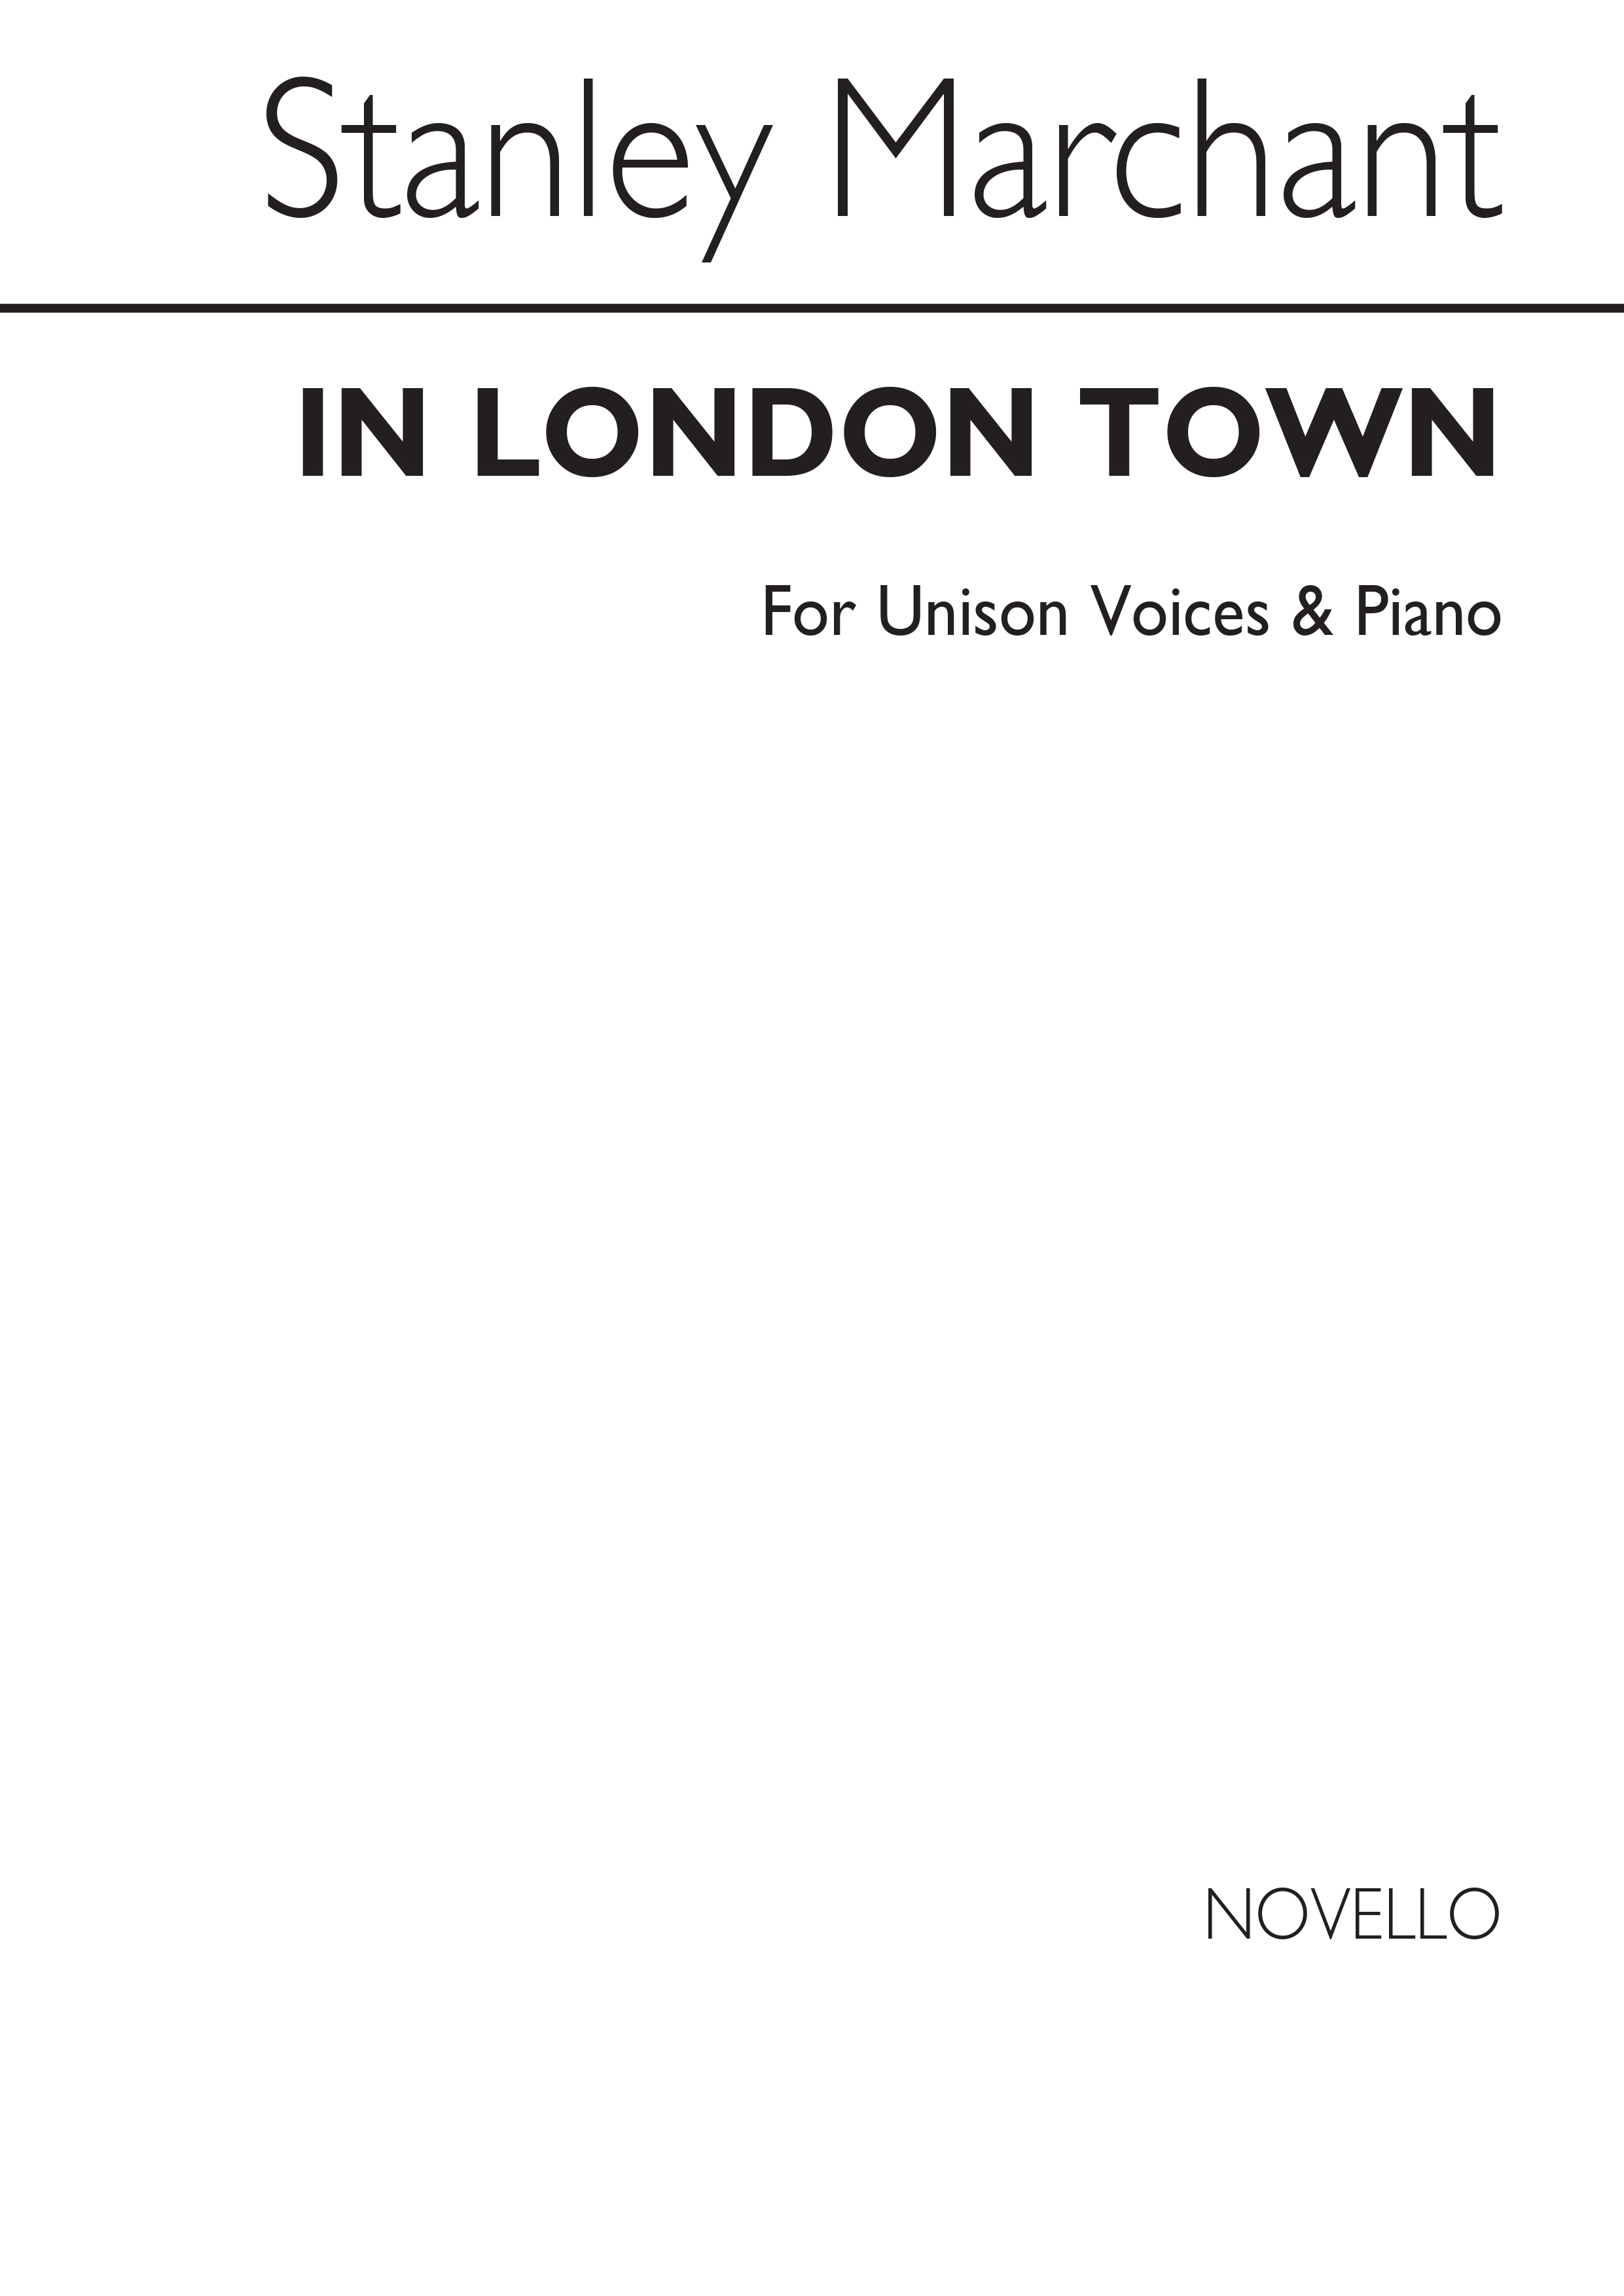 Marchant, S In London Town Unison And Piano